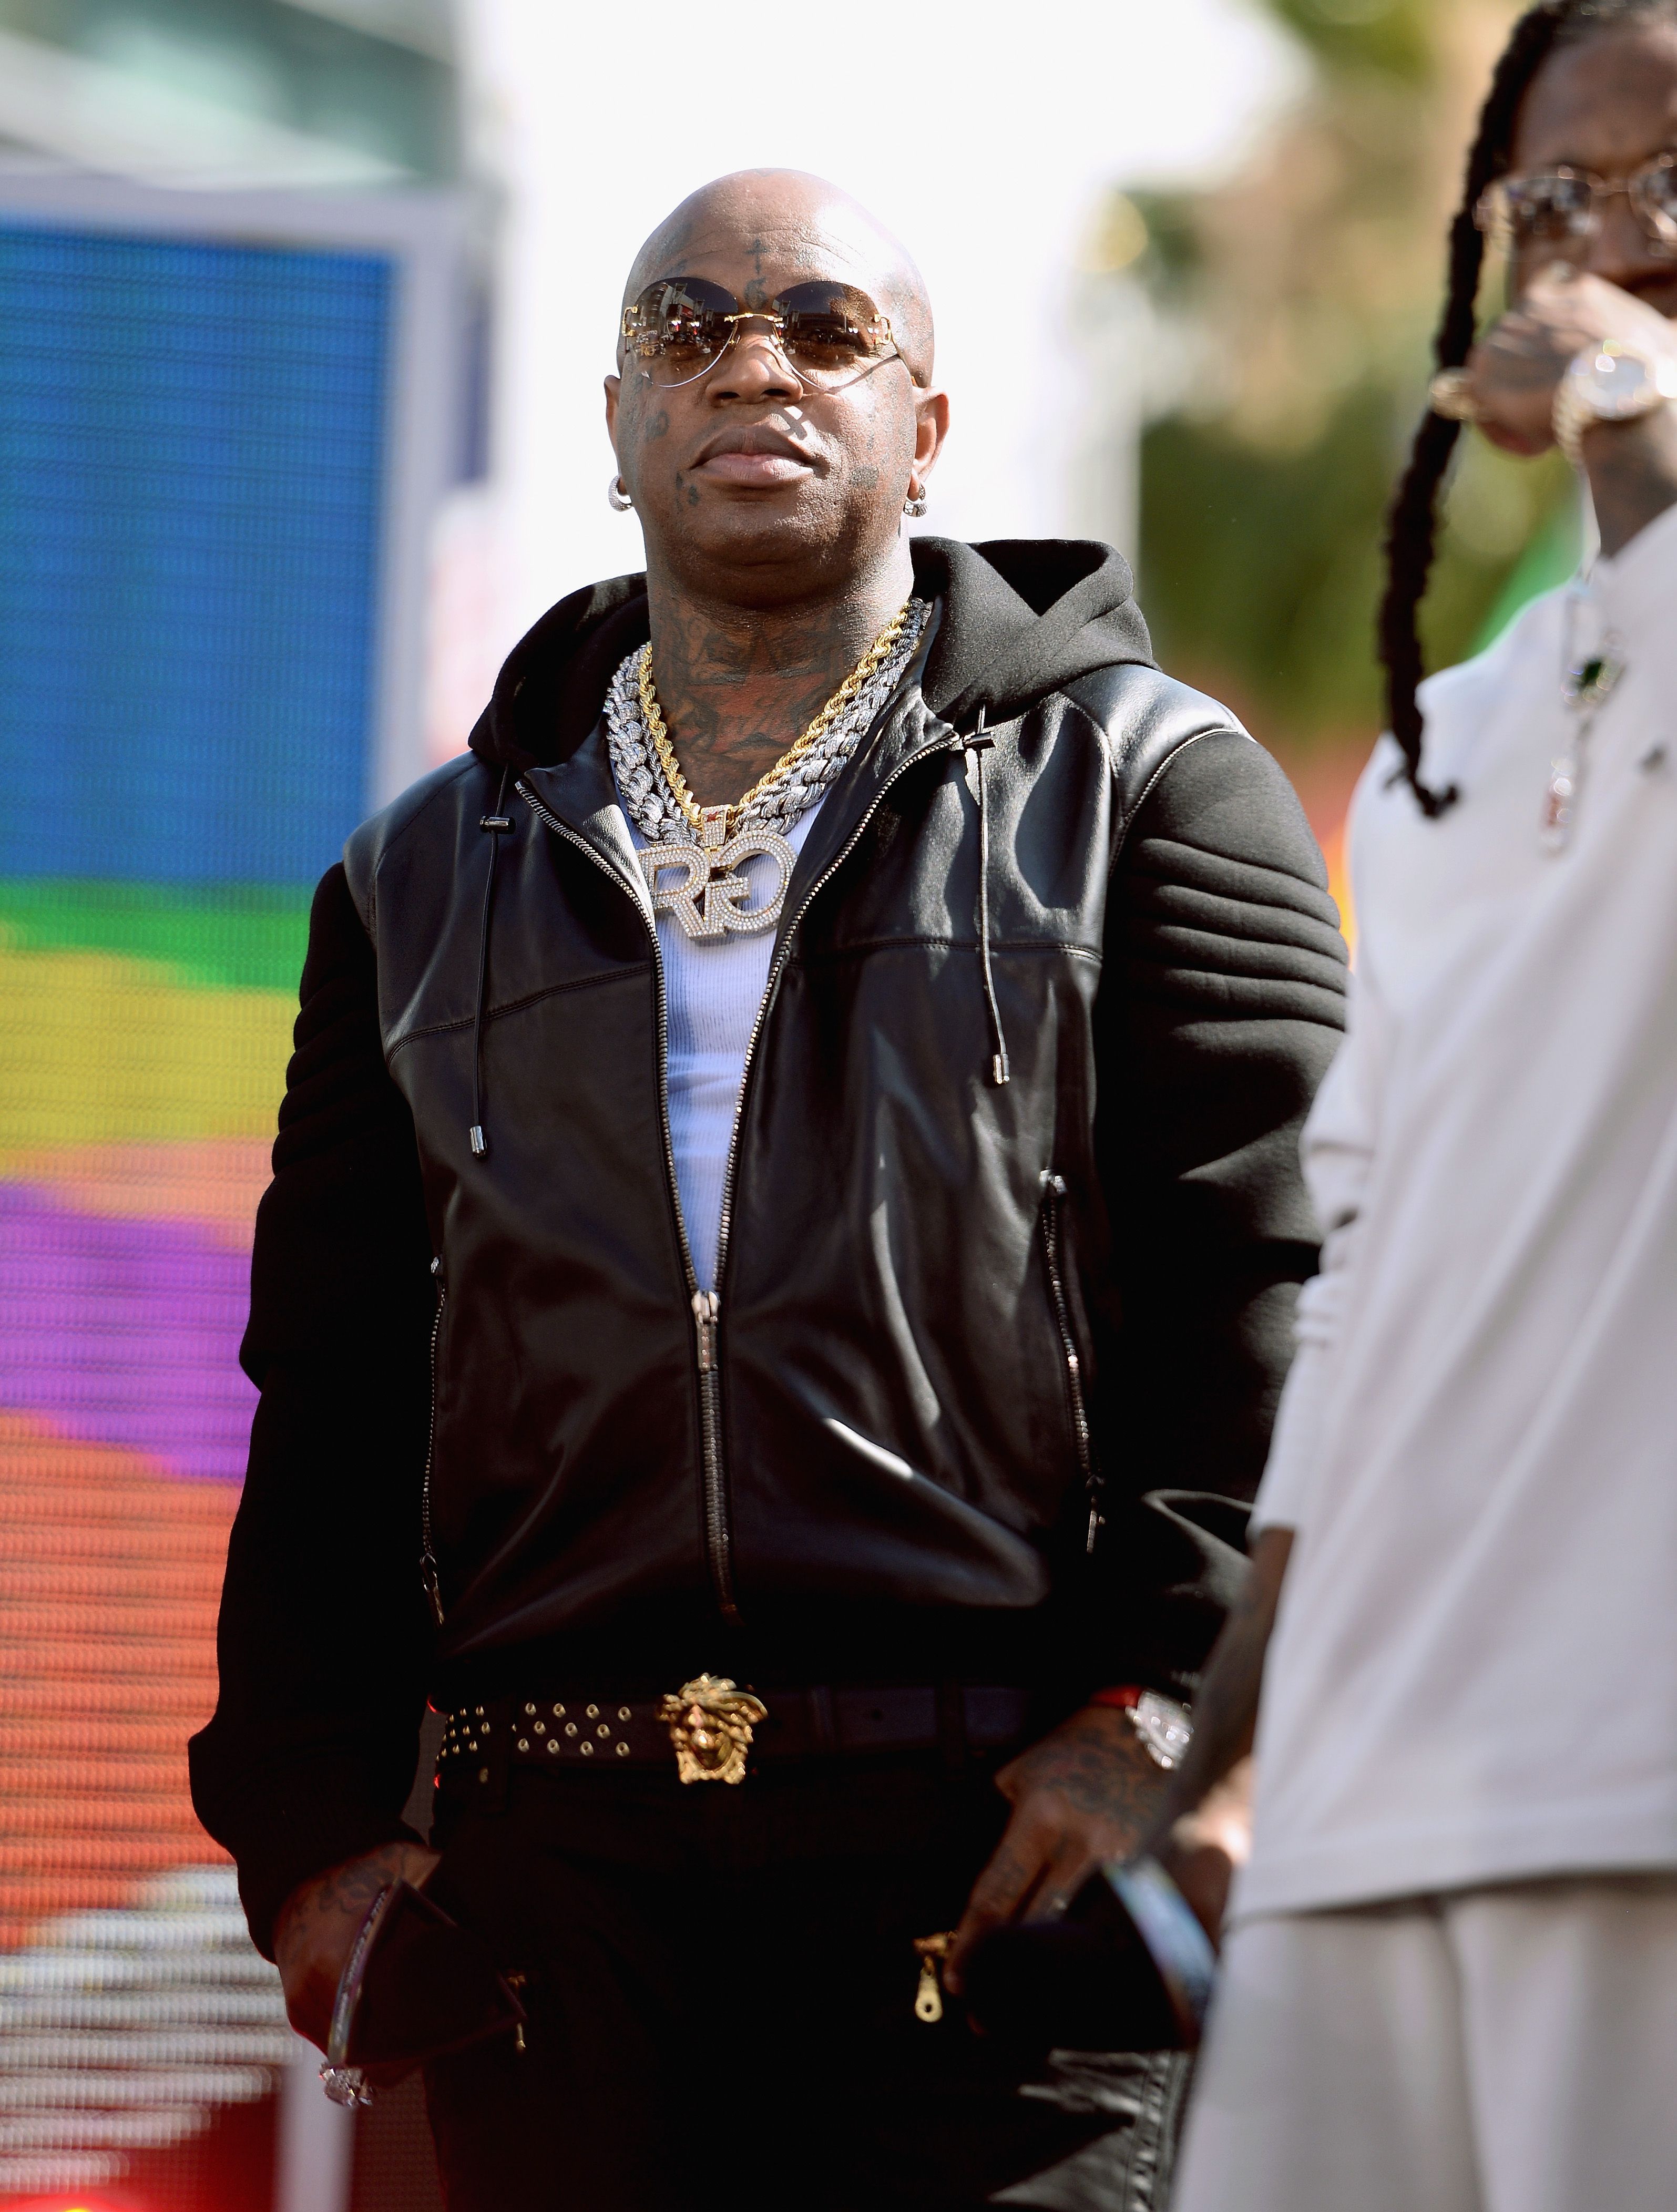 Birdman Reveals He's Ready to Retire Following His Recent Collaboration